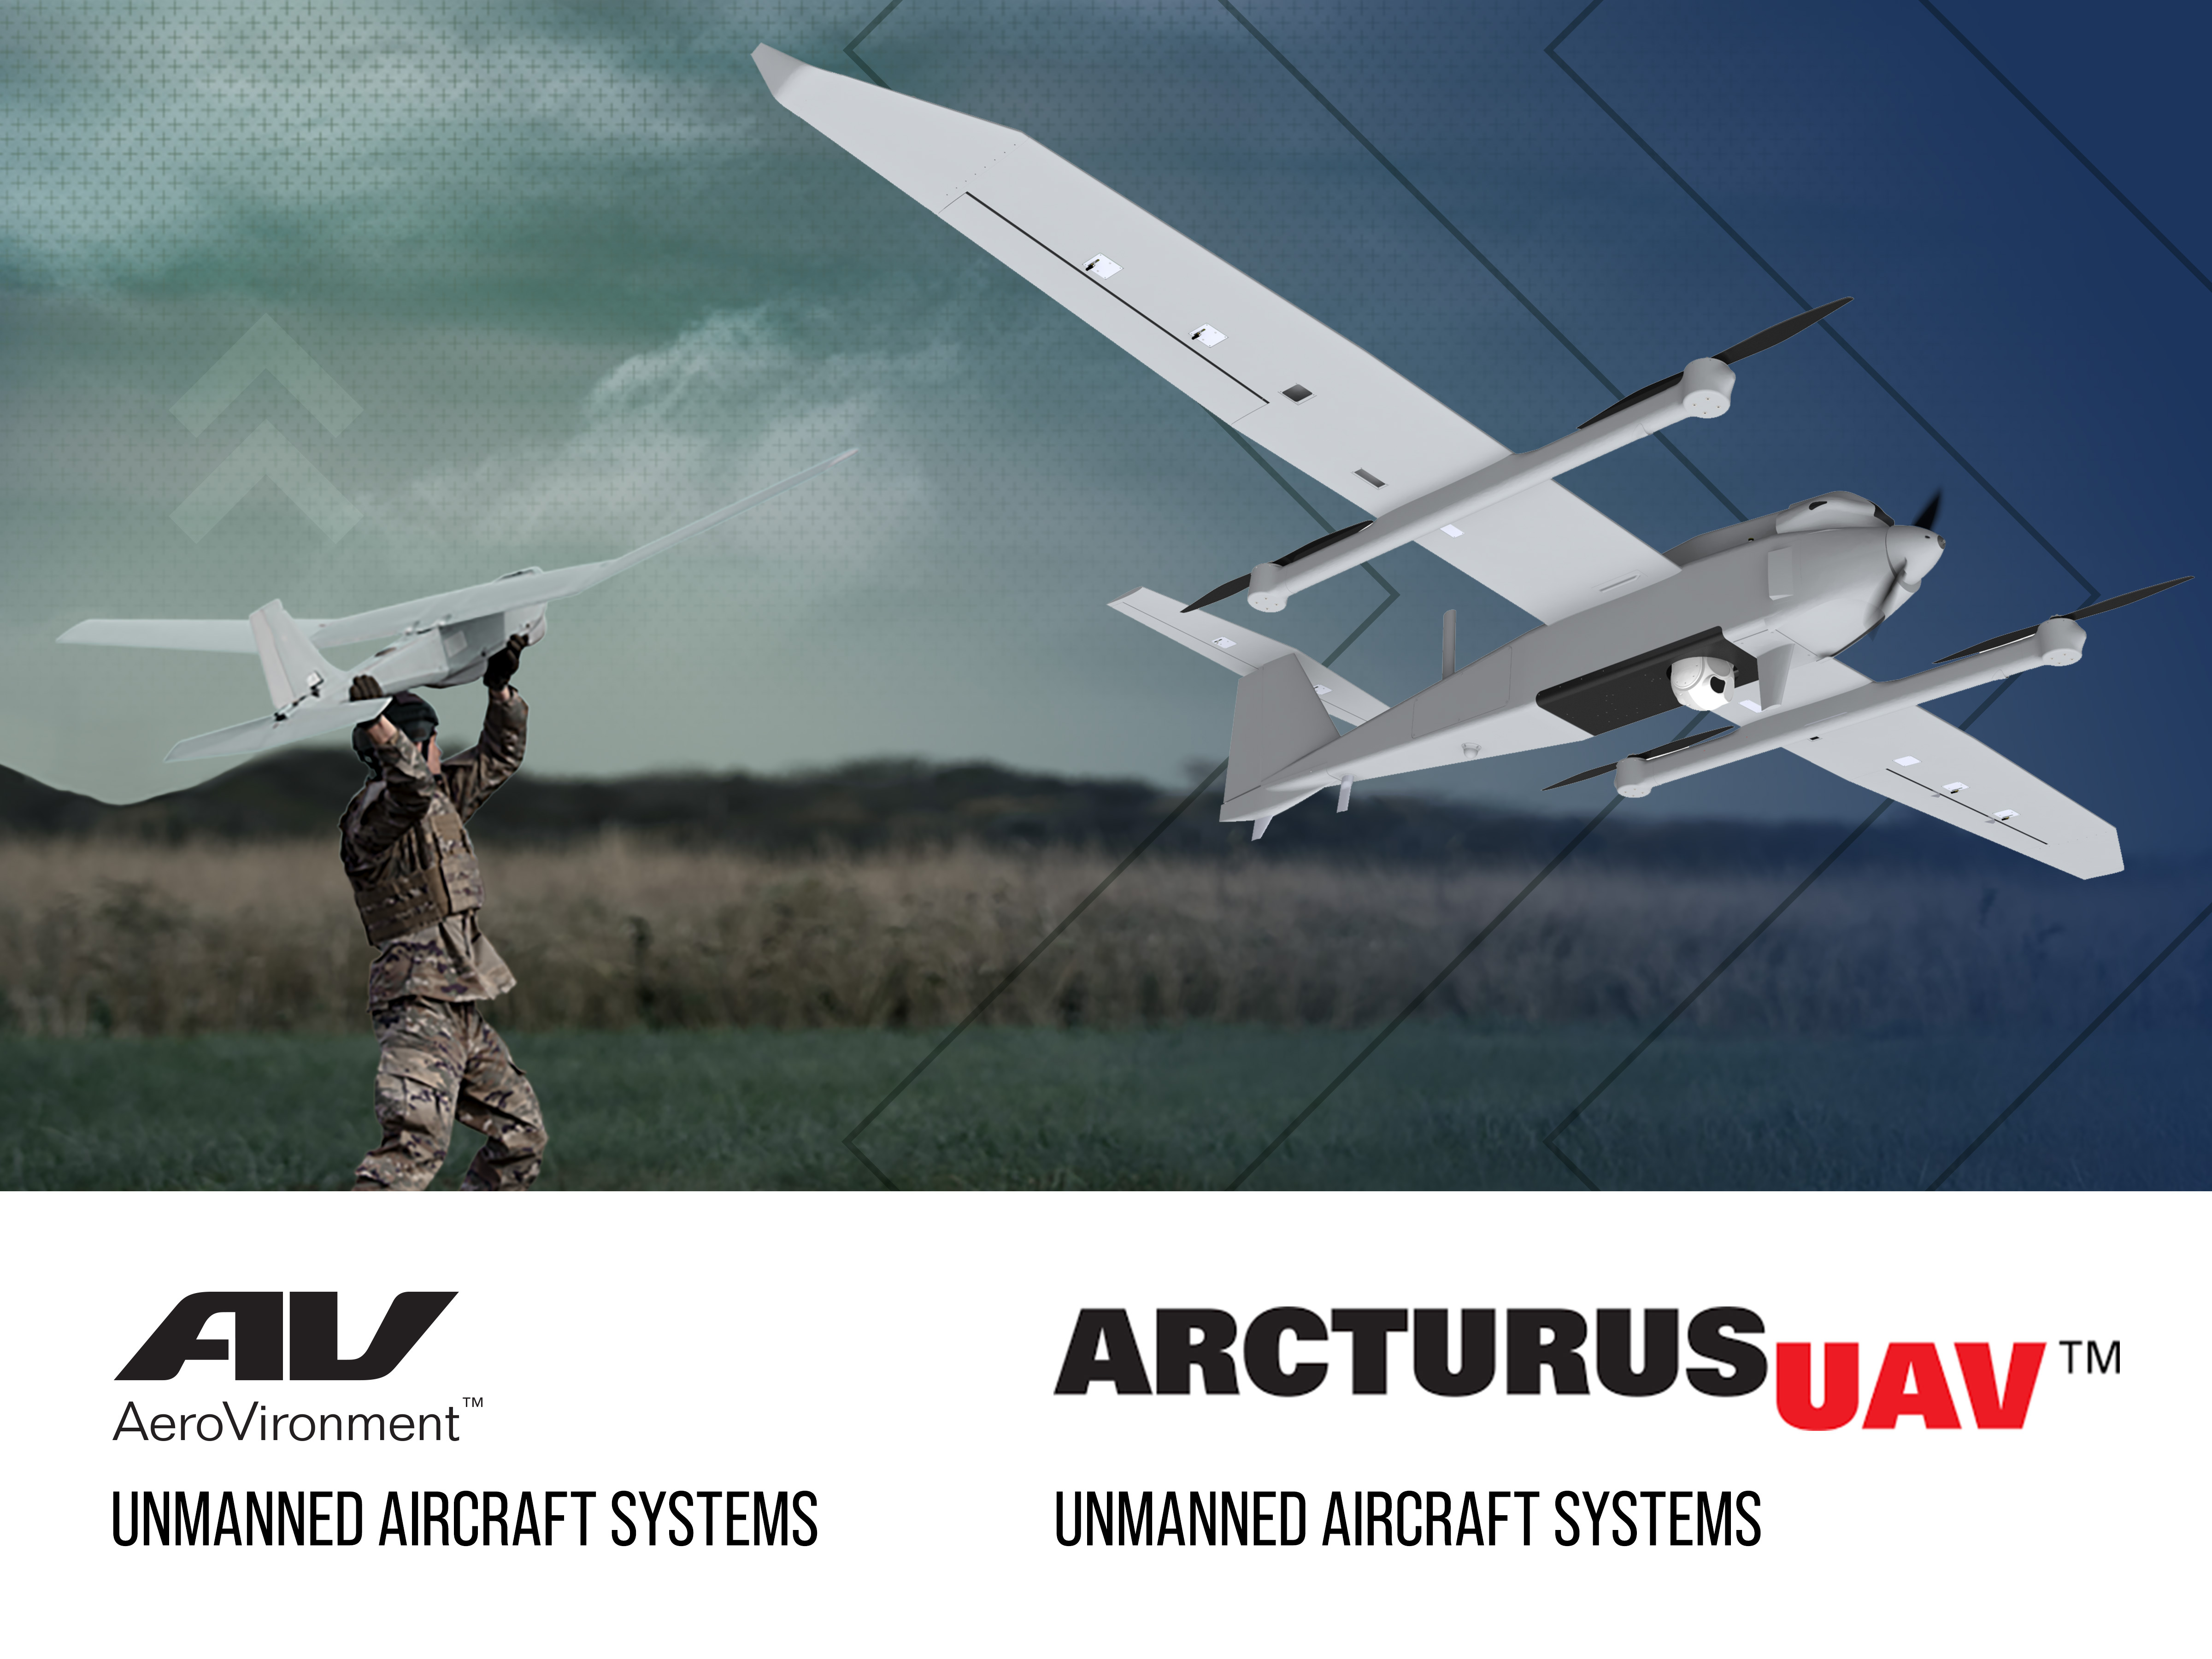 AeroVironment to Acquire Arcturus UAV, Expanding Product Portfolio and  Reach into Group 2 and 3 Unmanned Aircraft Systems Segments | Business Wire